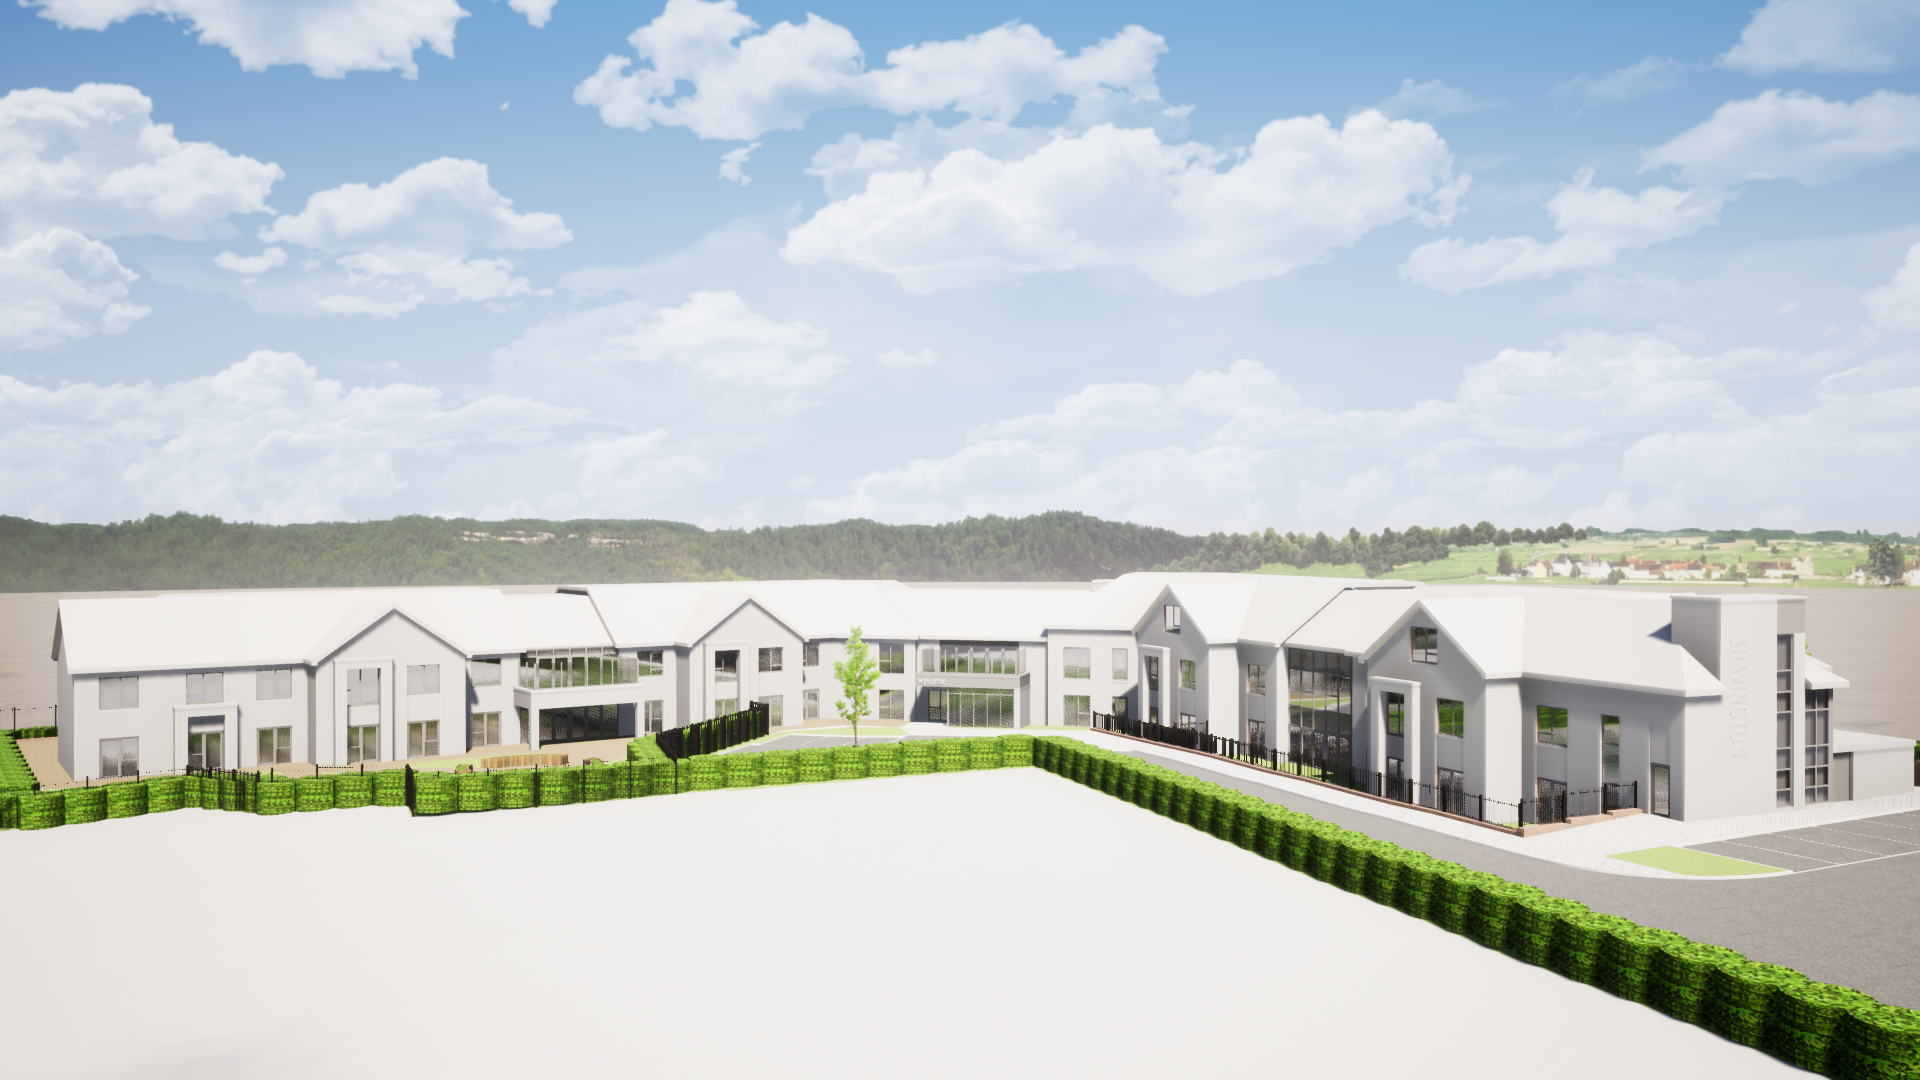 Three new locations for Anavo's innovative care home design